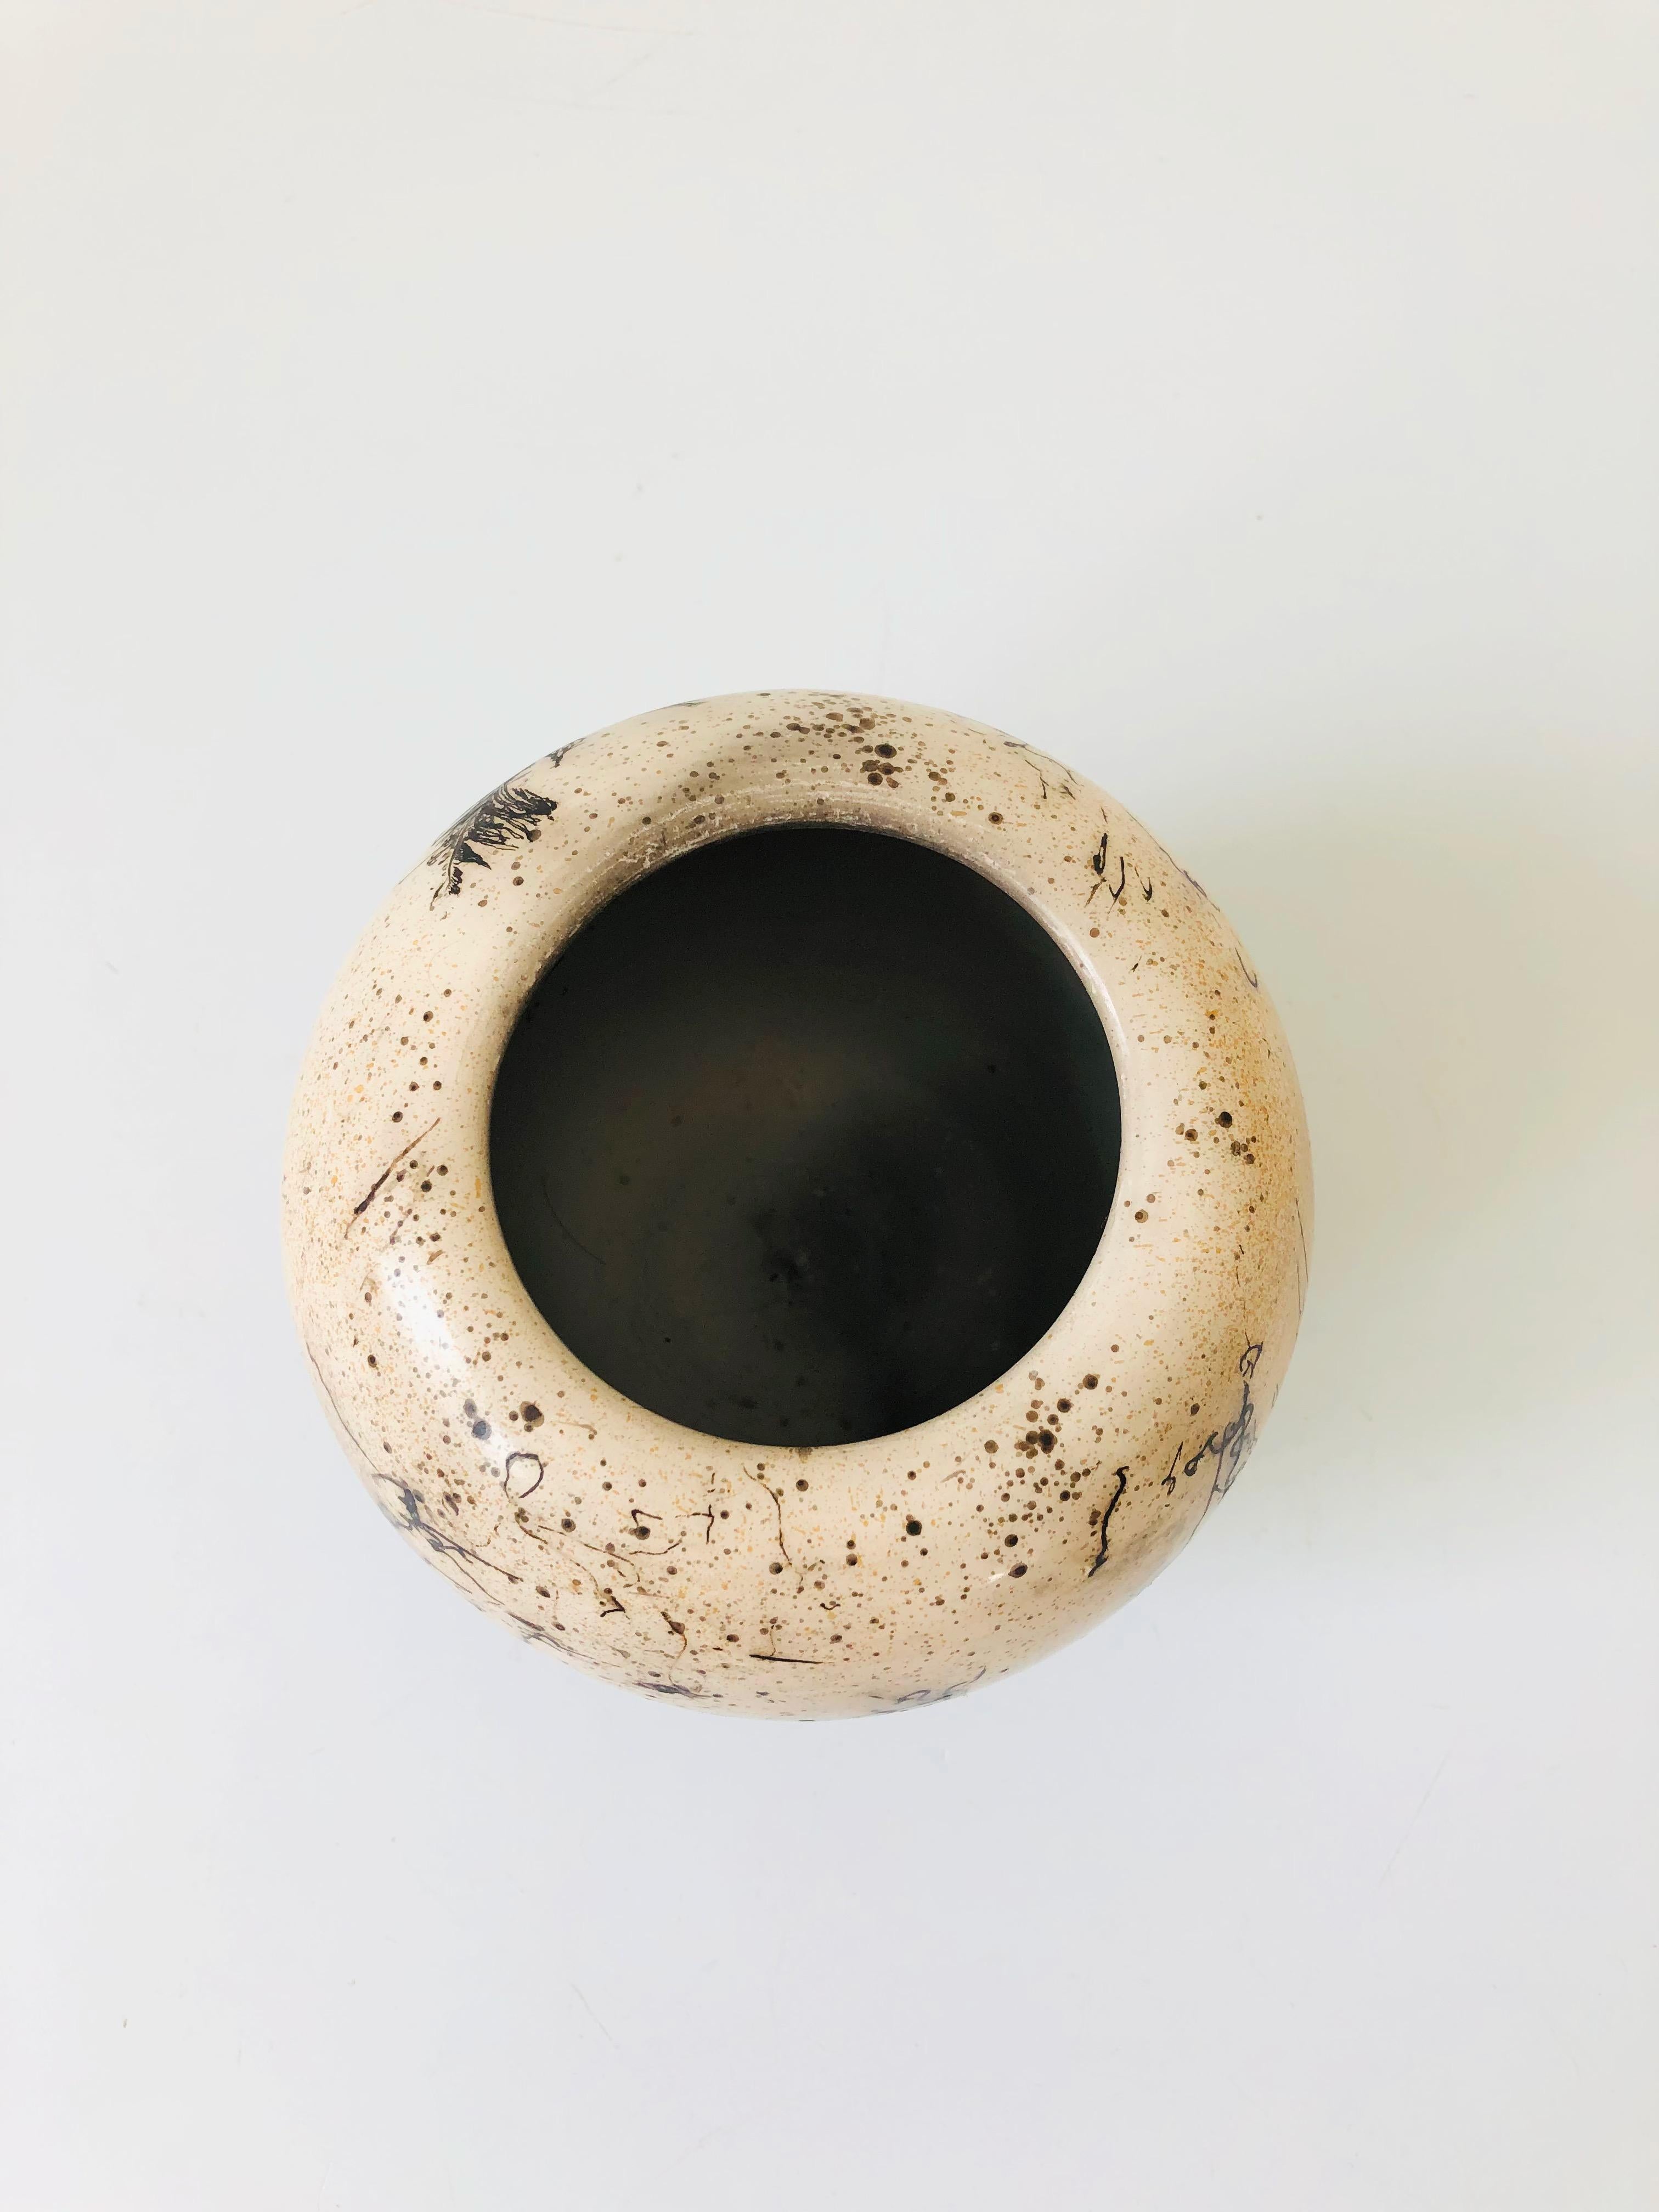 A beautiful vintage horse hair pottery vase. Matte white glaze with a free form horse hair design in dark gray lines. Horse hair pottery is created using the technique of burning real horse hairs into the surface of pottery to create unique